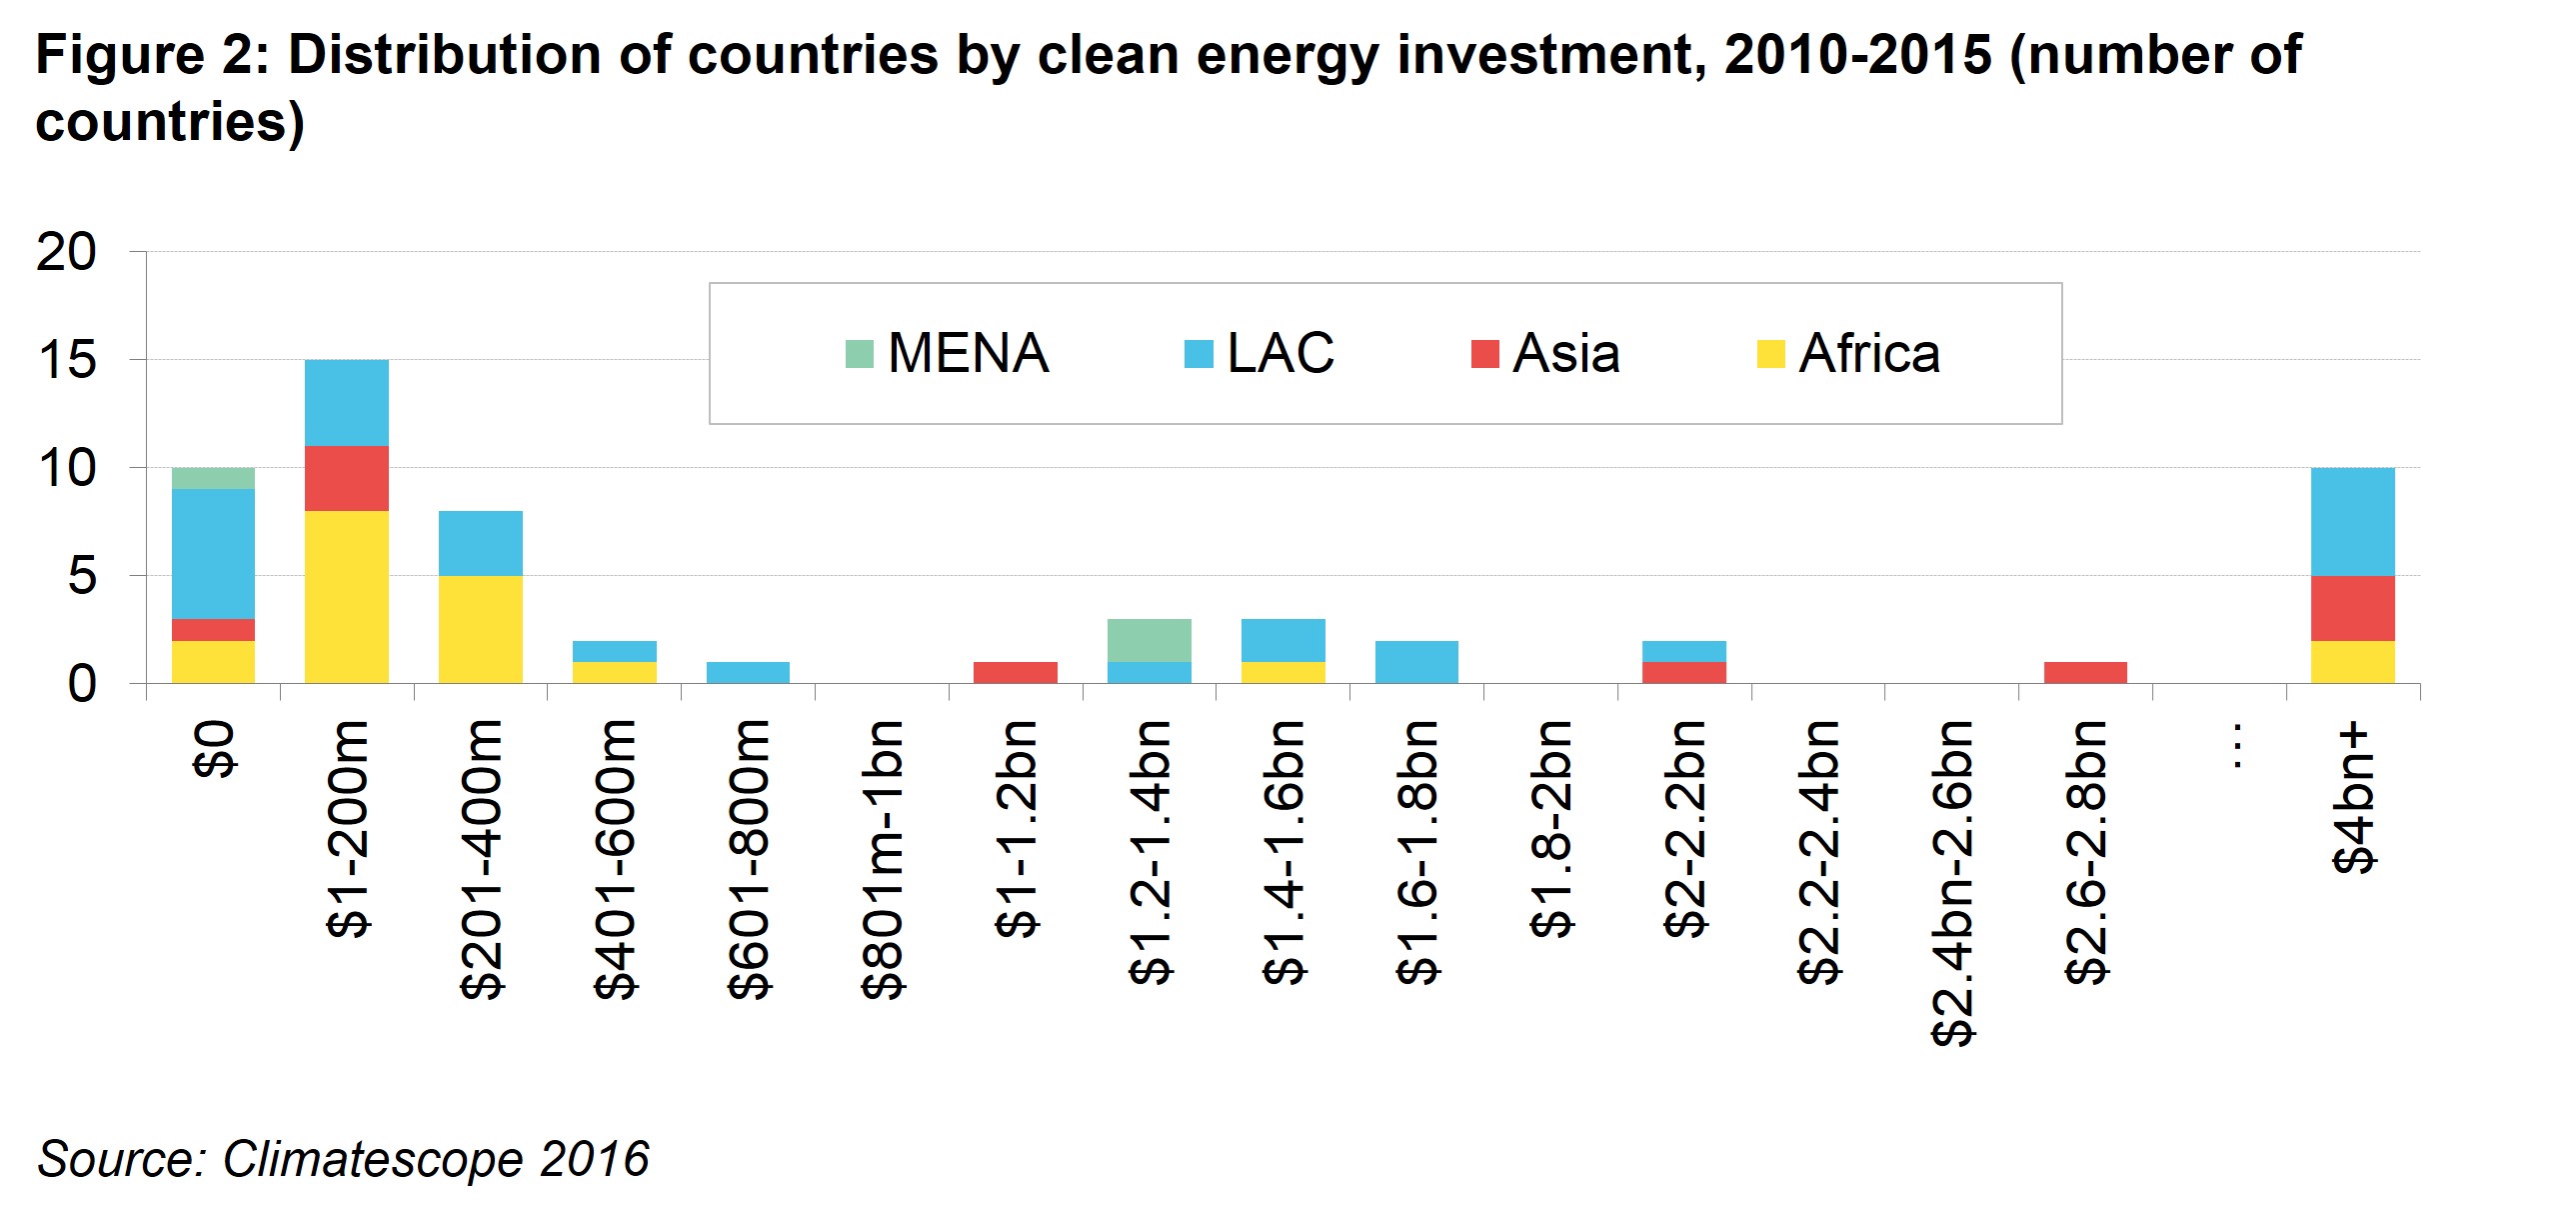 PII Fig 2 - Distribution of countries by clean energy investment, 2010-2015 (number of countries)